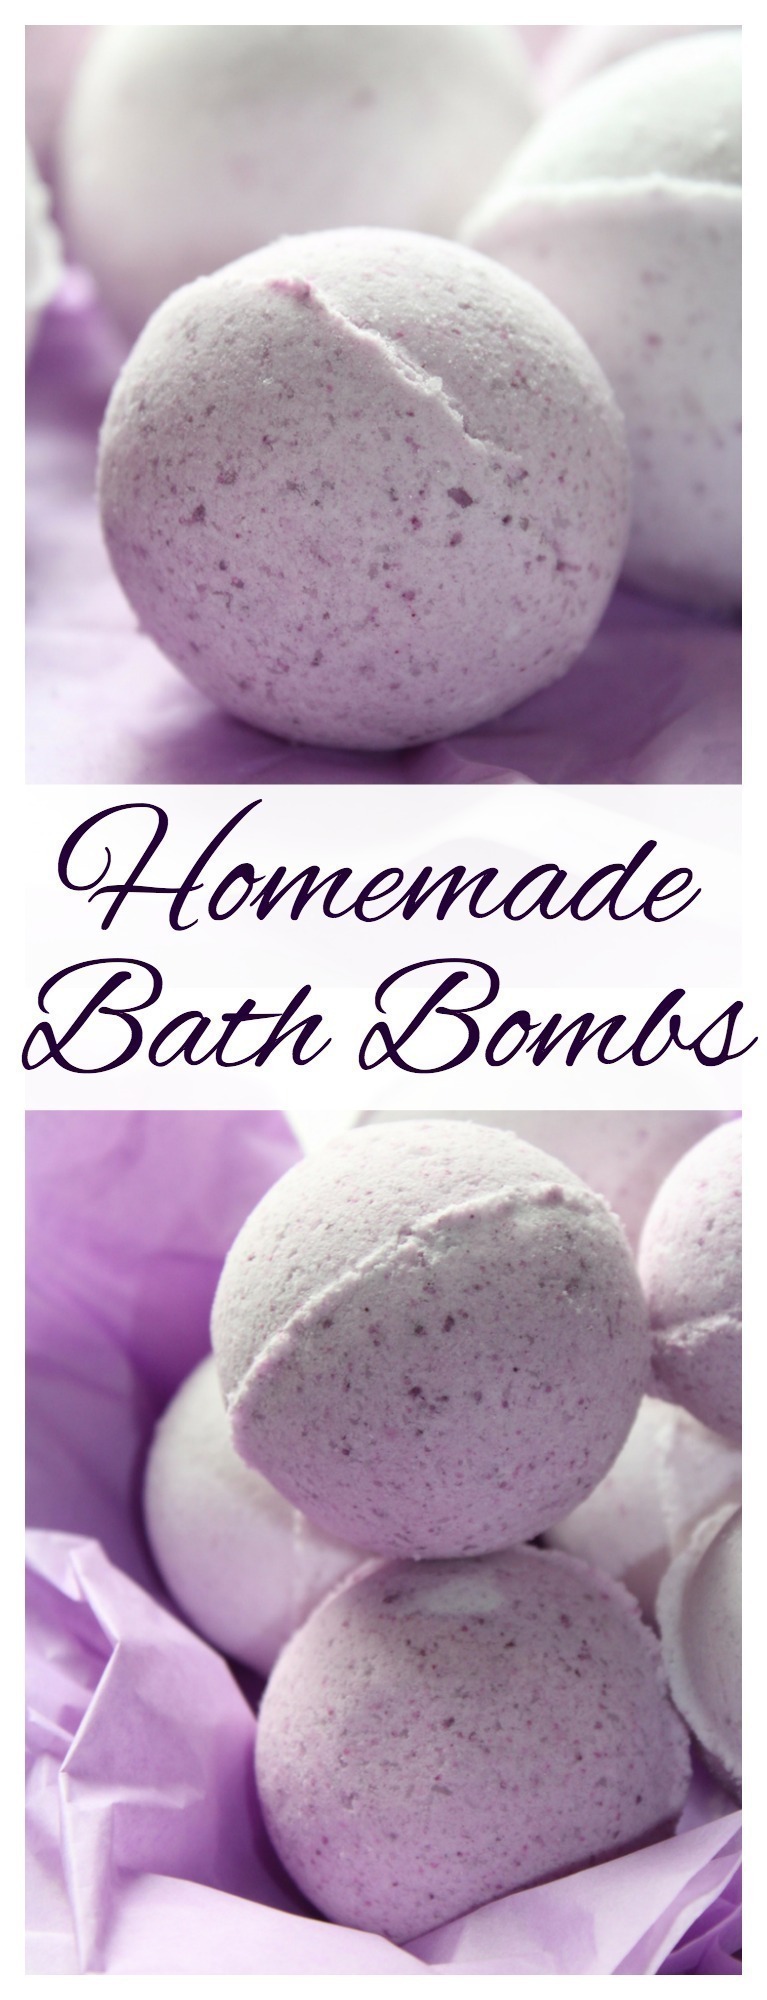 These DIY Bath Bombs are incredibly easy to make - personalize with your own scent and color and give as gifts for Mother's Day, Valentine's Day, birthdays and more.